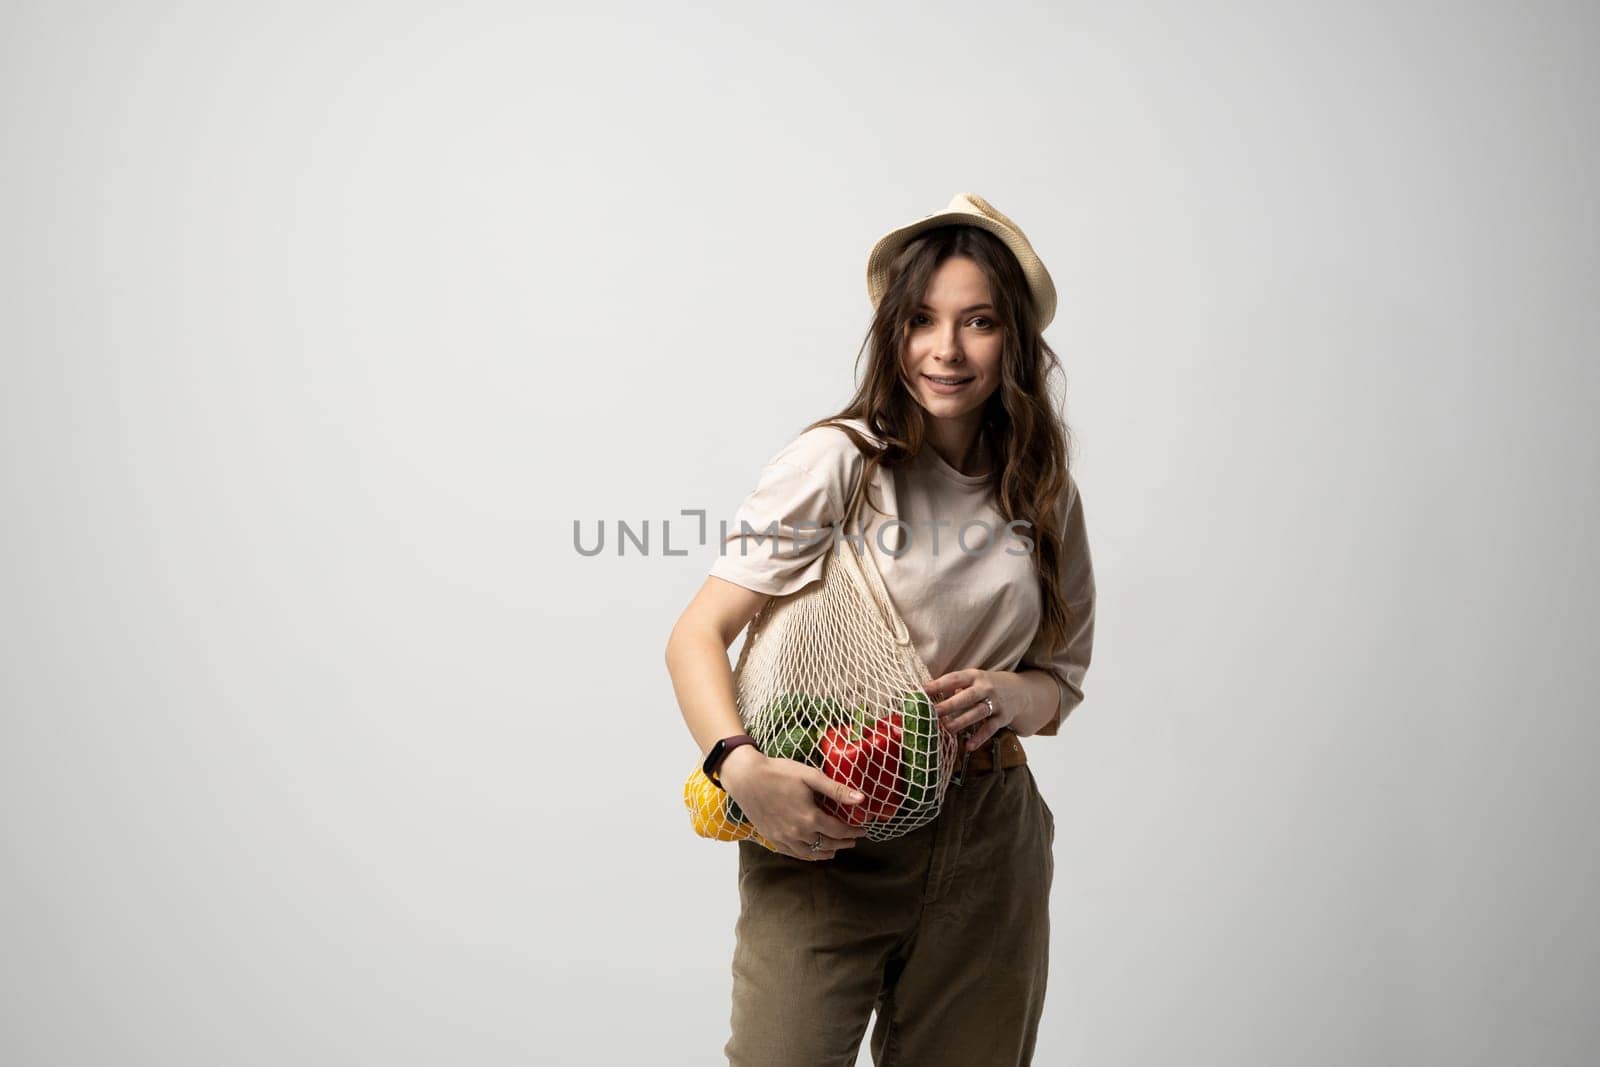 Zero waste concept with copy space. Woman holding a reusable mesh shopping bag with vegetables, products. Eco friendly mesh shopper. Zero waste, plastic free concept